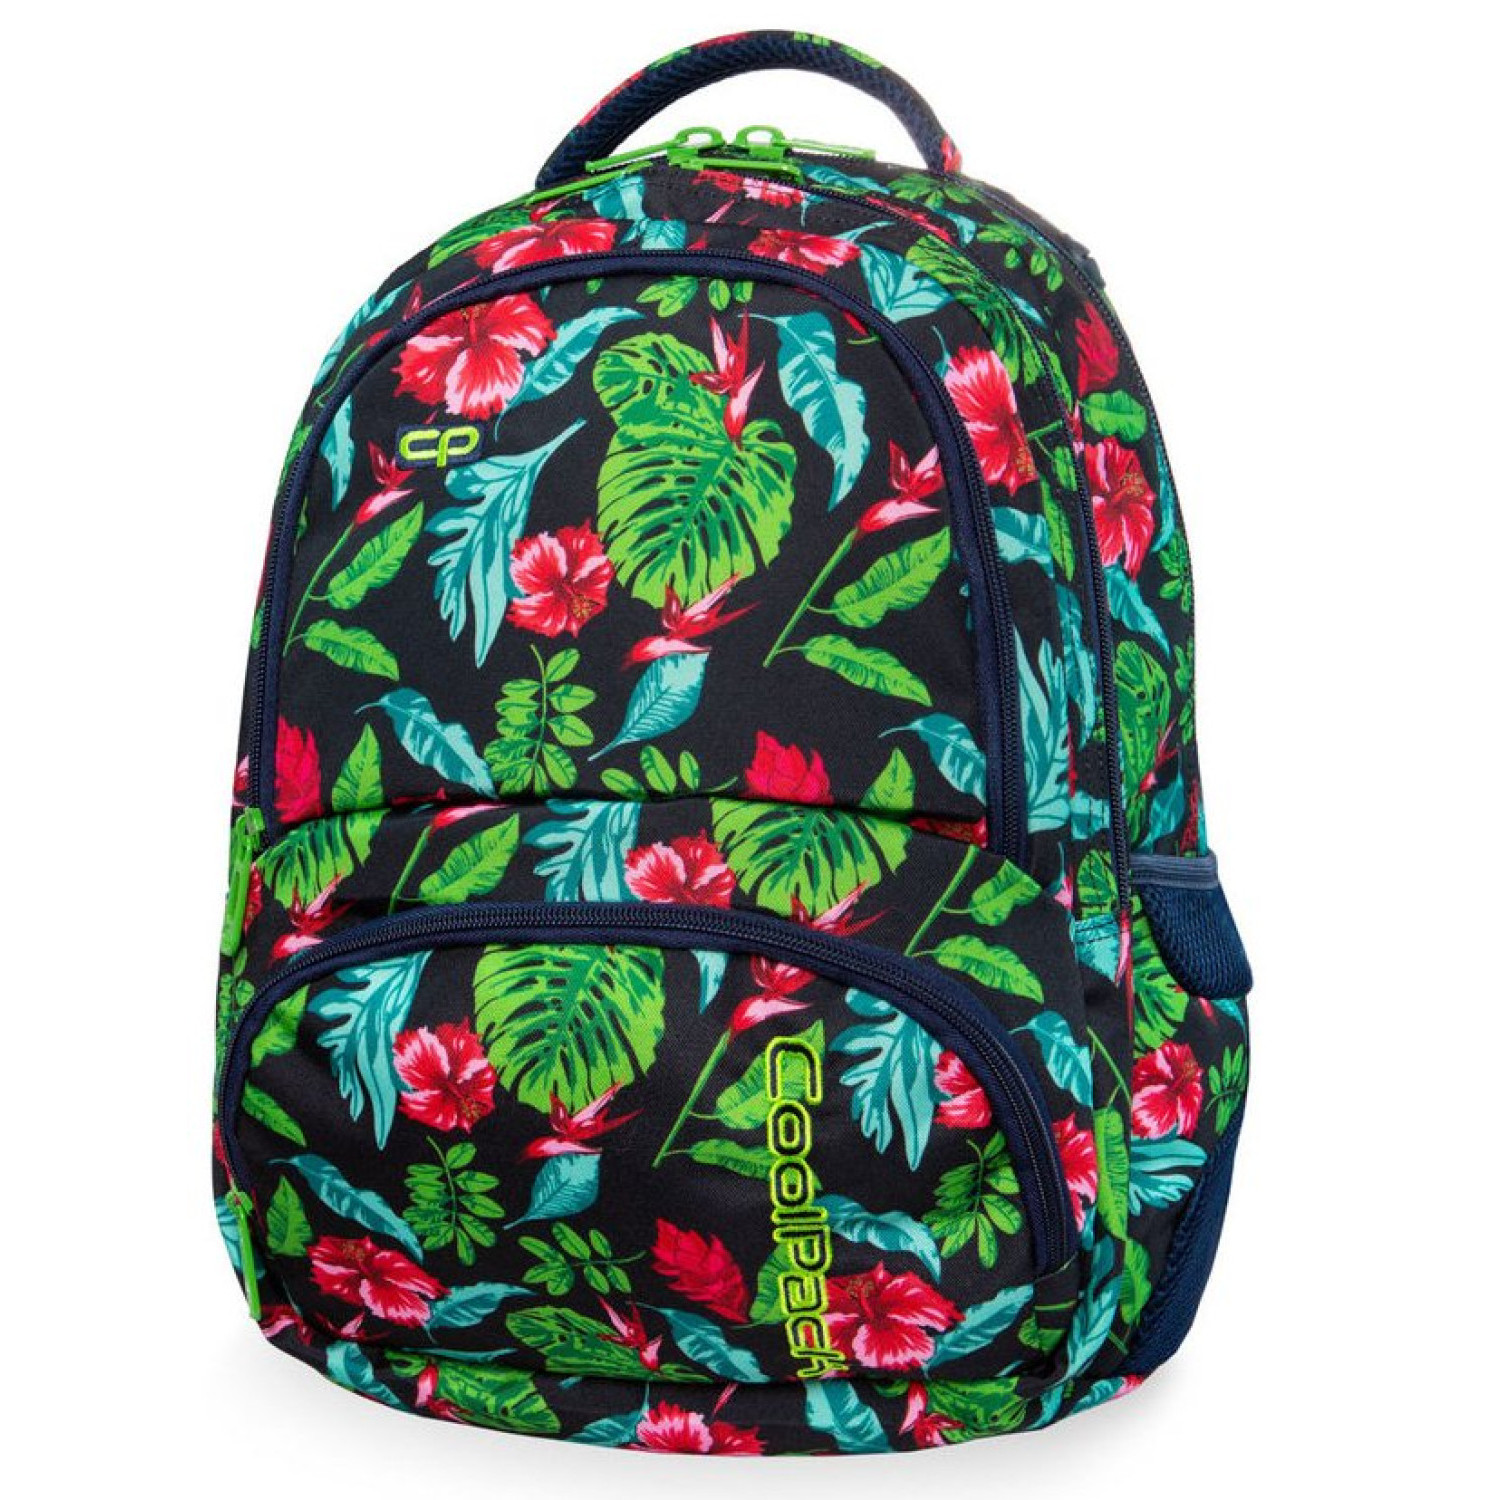 Раница Coolpack Spiner Candy Jungle